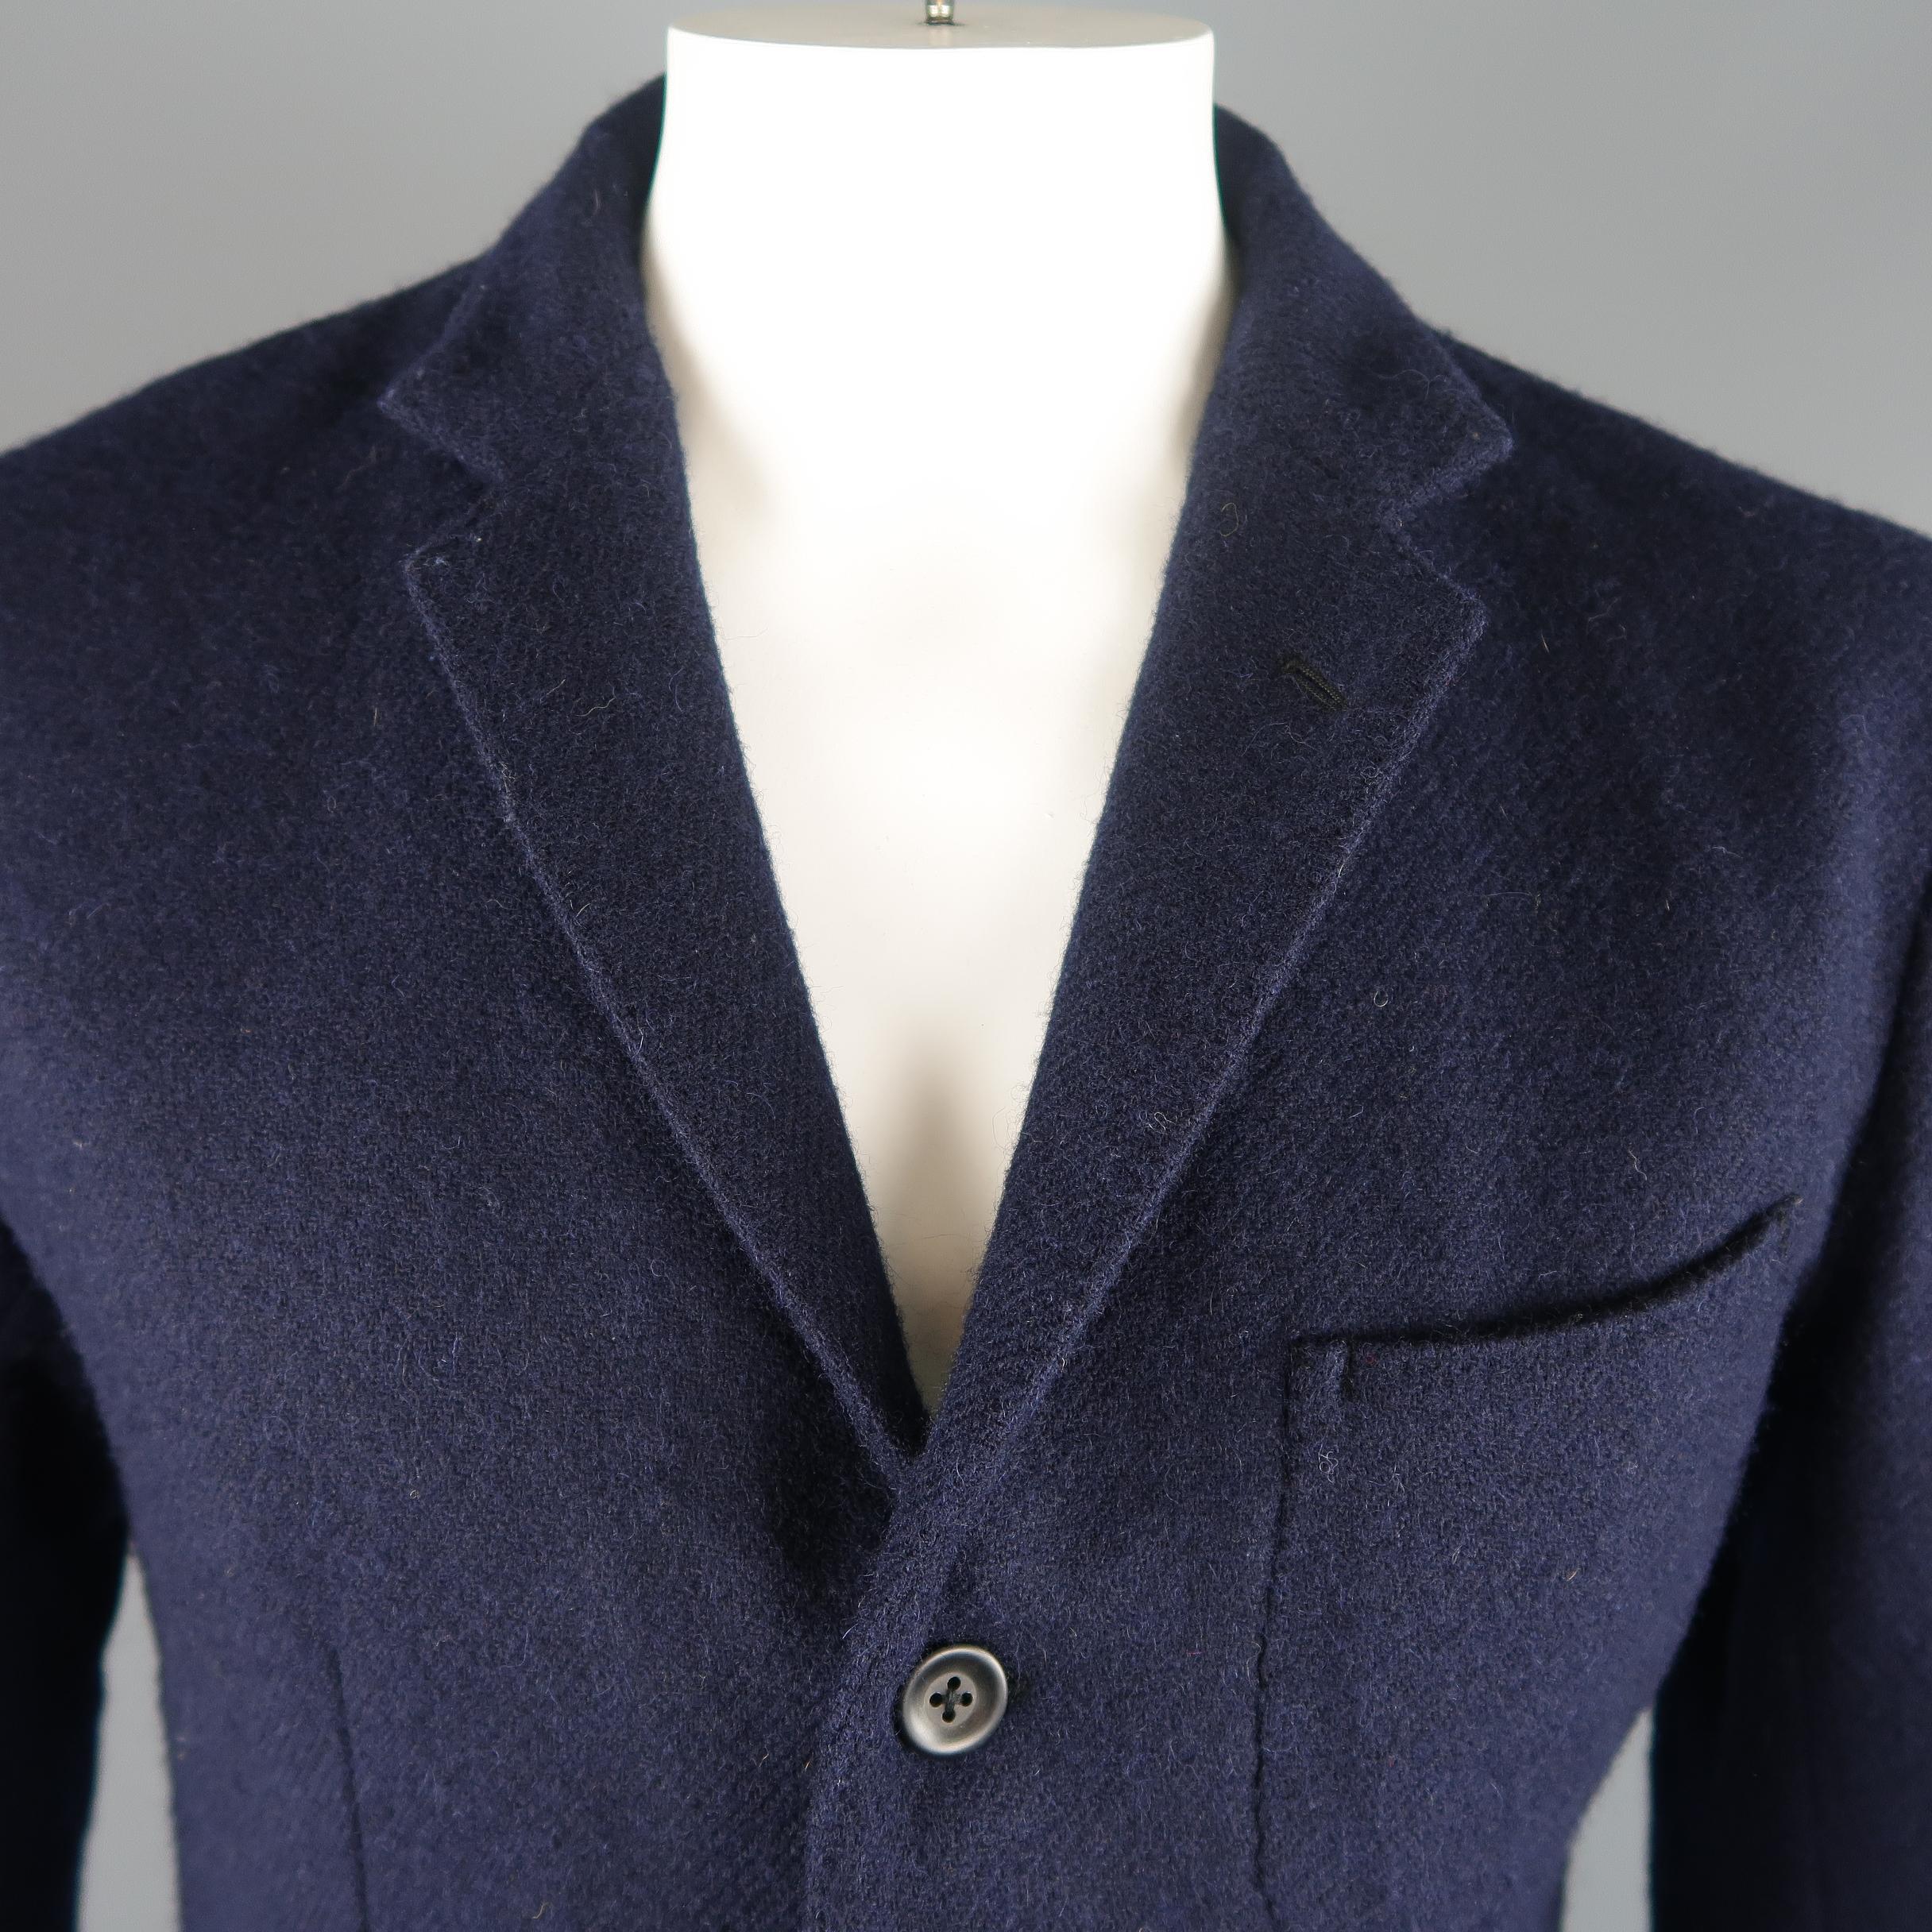 Single breasted 45RPM relaxed casual sport coat jacket comes in navy blue heavy wool twill with leather trimmed collar, notch lapel, three button front, functional button cuffs, and patch pockets. Made in Japan.
 
Excellent Pre-Owned Condition.